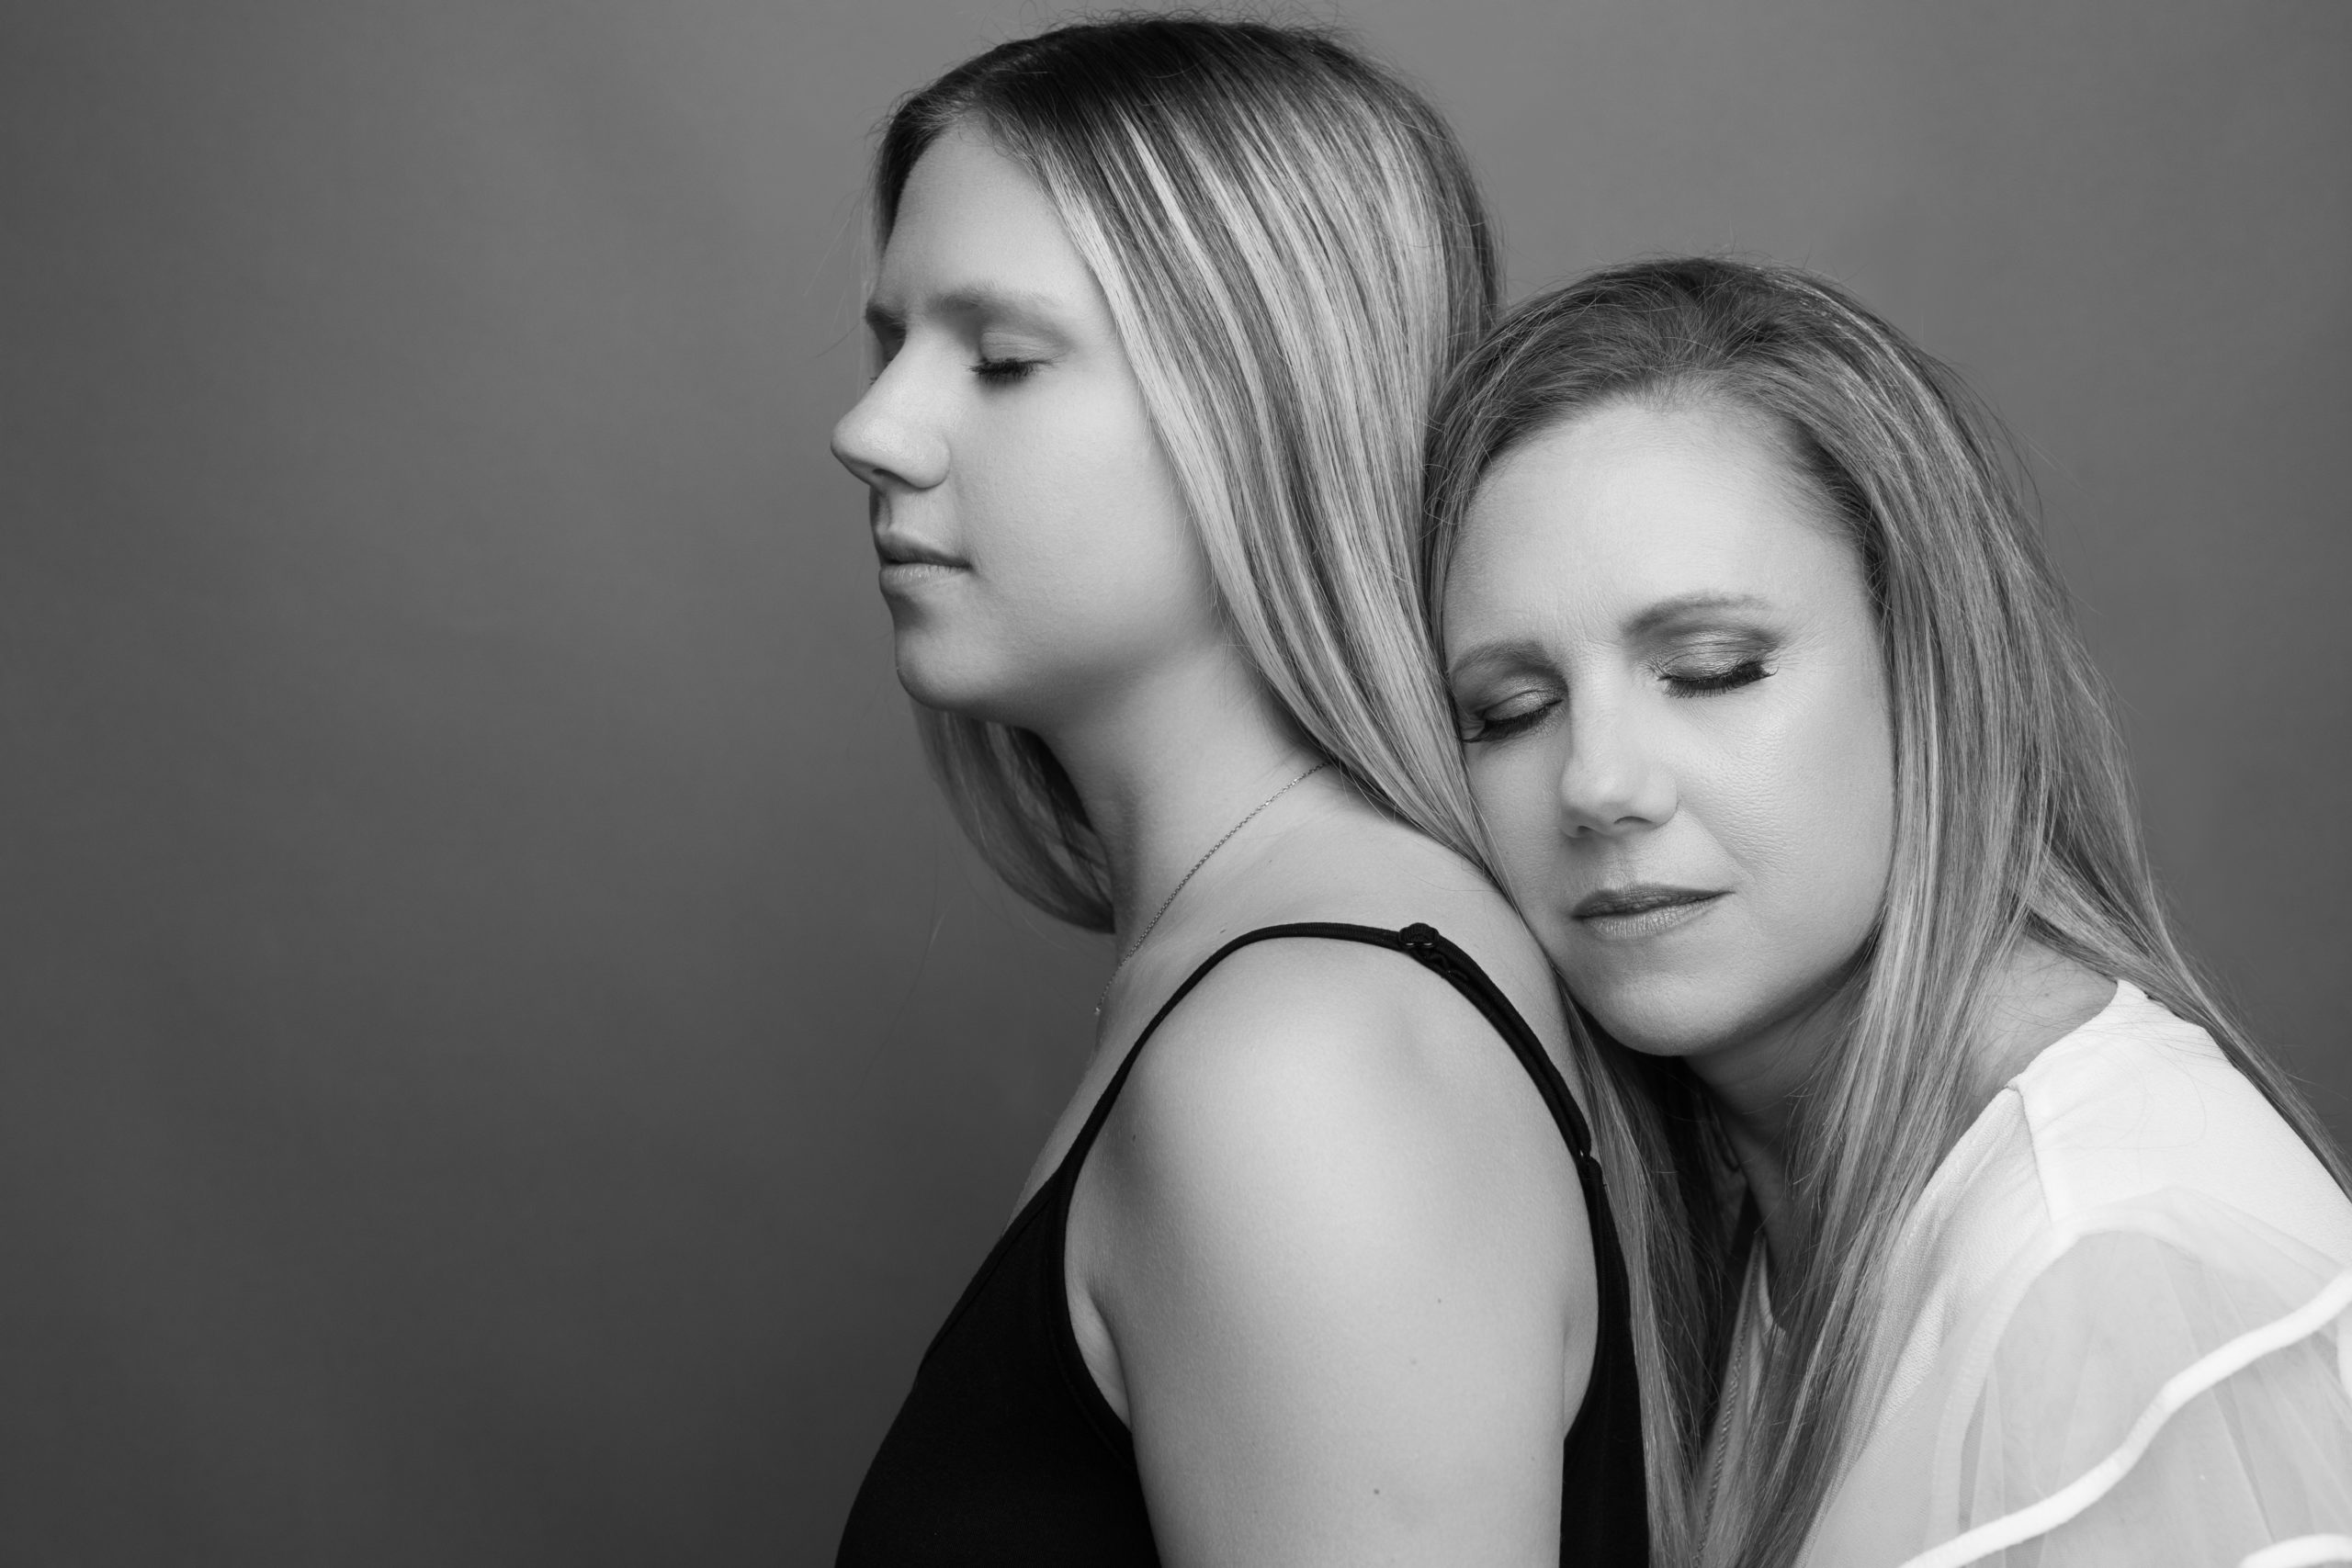 A mother rests her head on her adult daughter's back as they pose for a black and white image. Both women have their eyes closed.